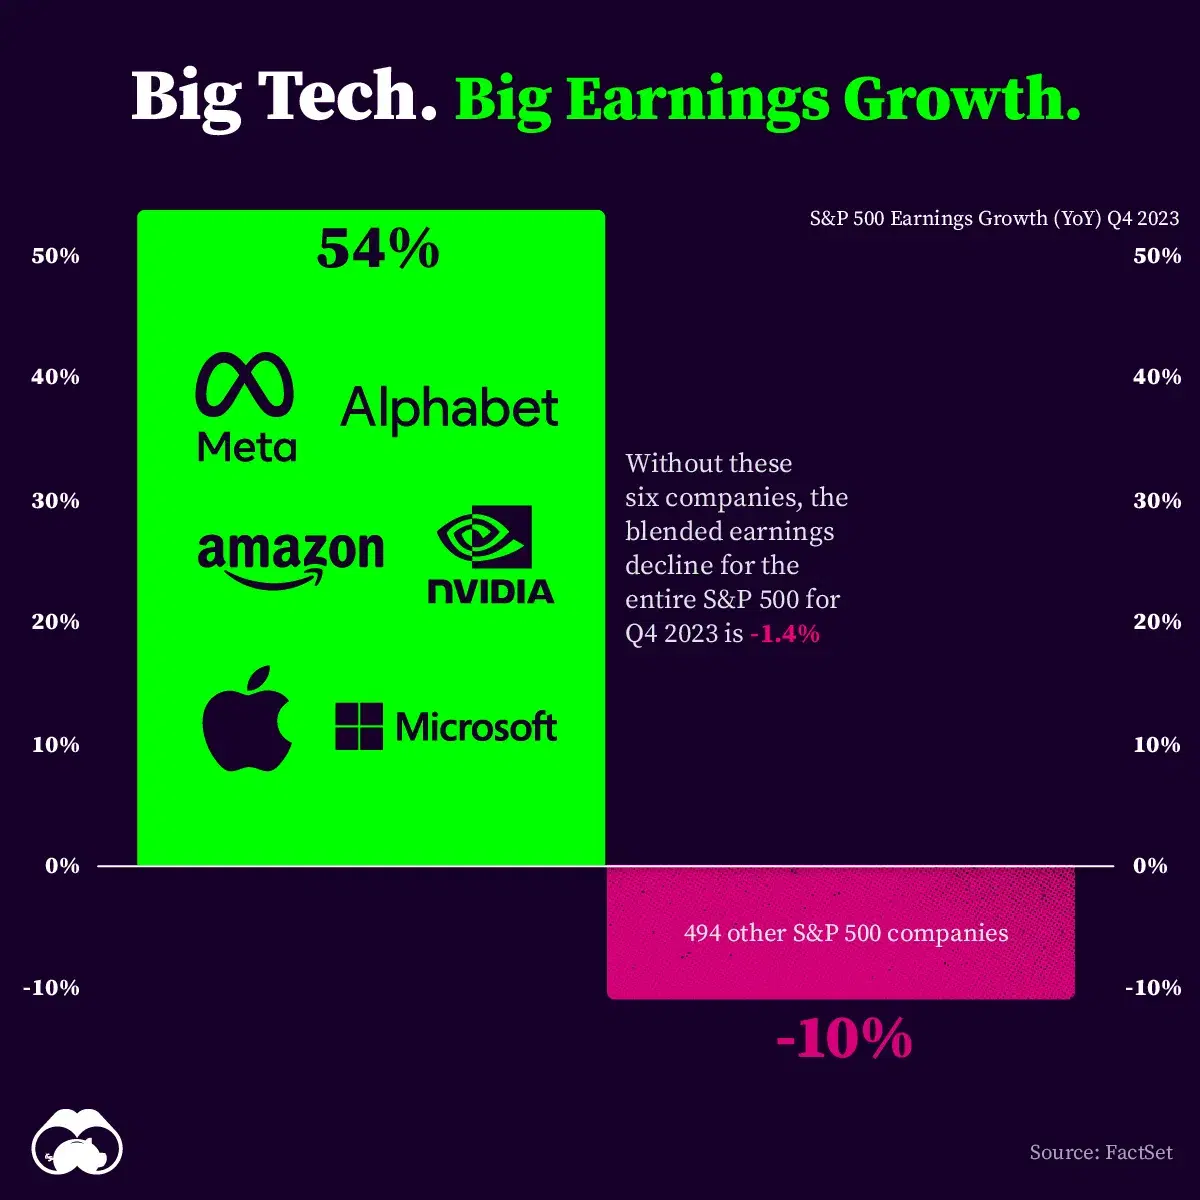 Six Big Tech Companies Propped Up the S&P 500